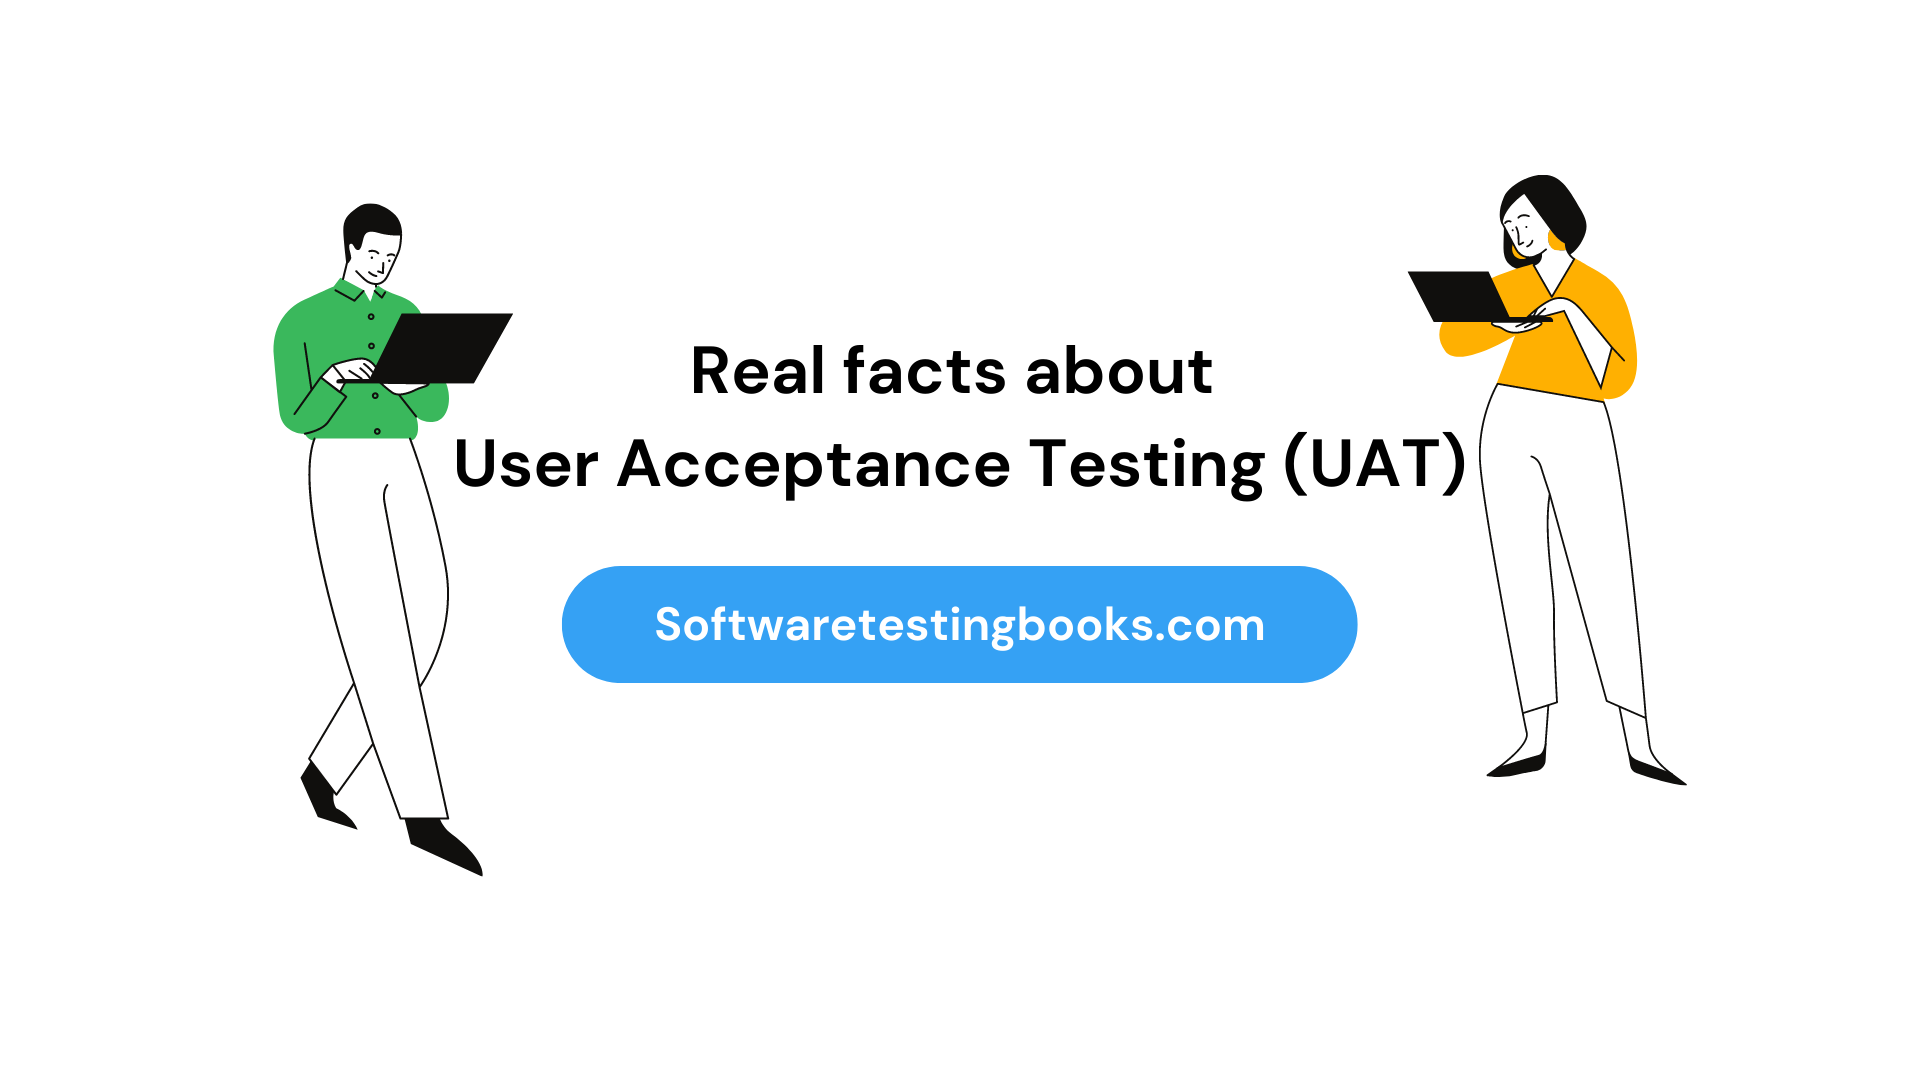 Real facts about User Acceptance Testing (UAT) - https://softwaretestingbooks.com/